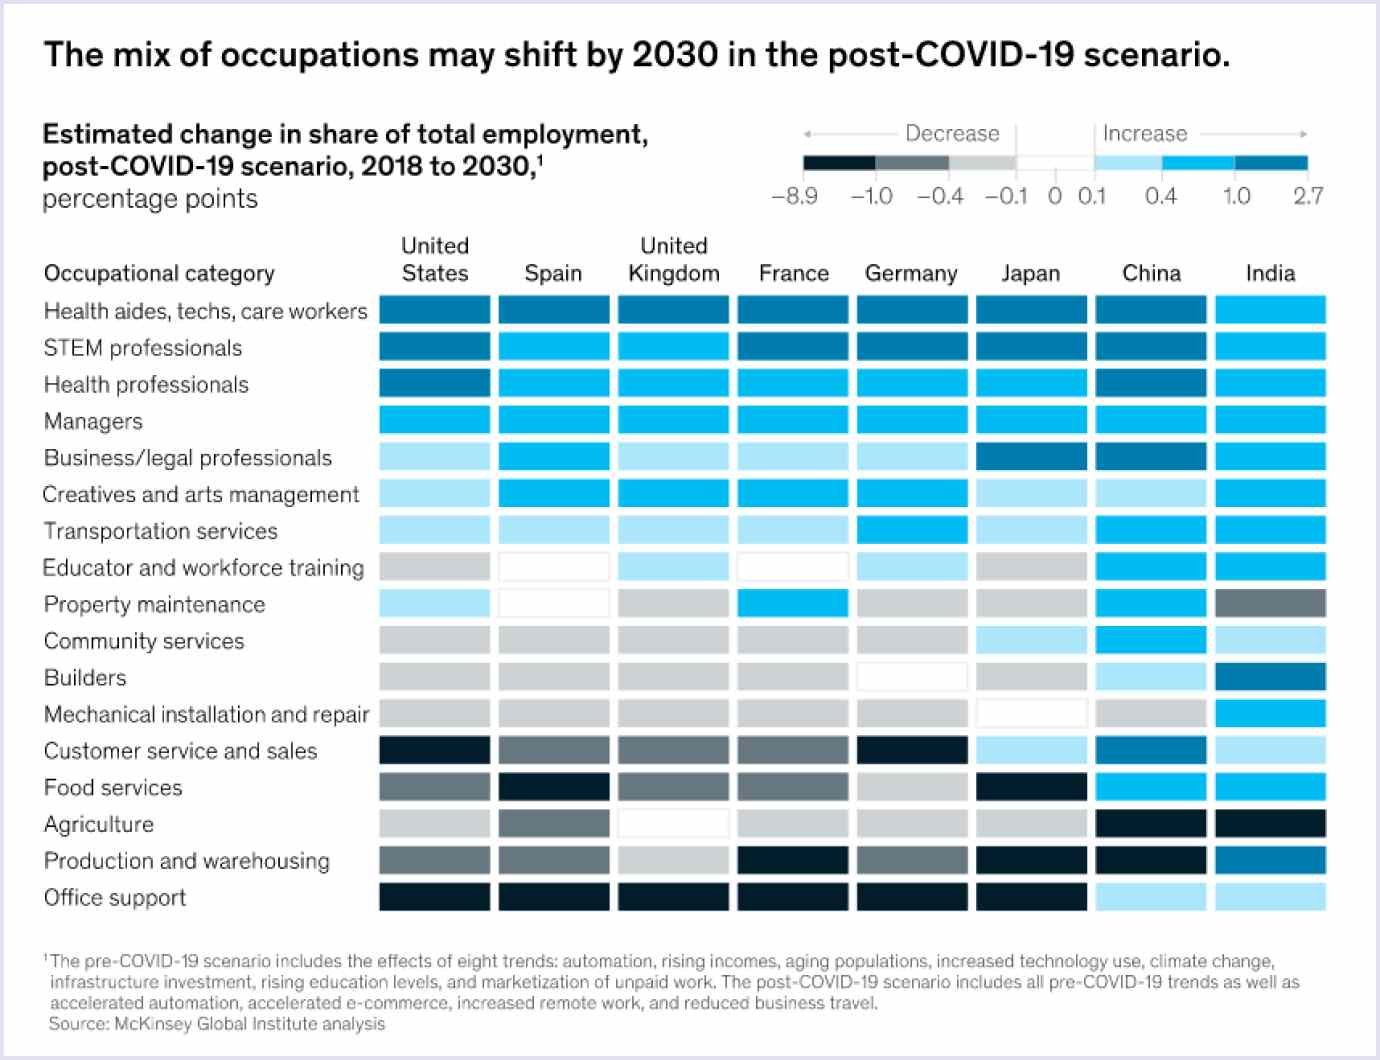 changes in share of total employment, post-Covid-19 scenario